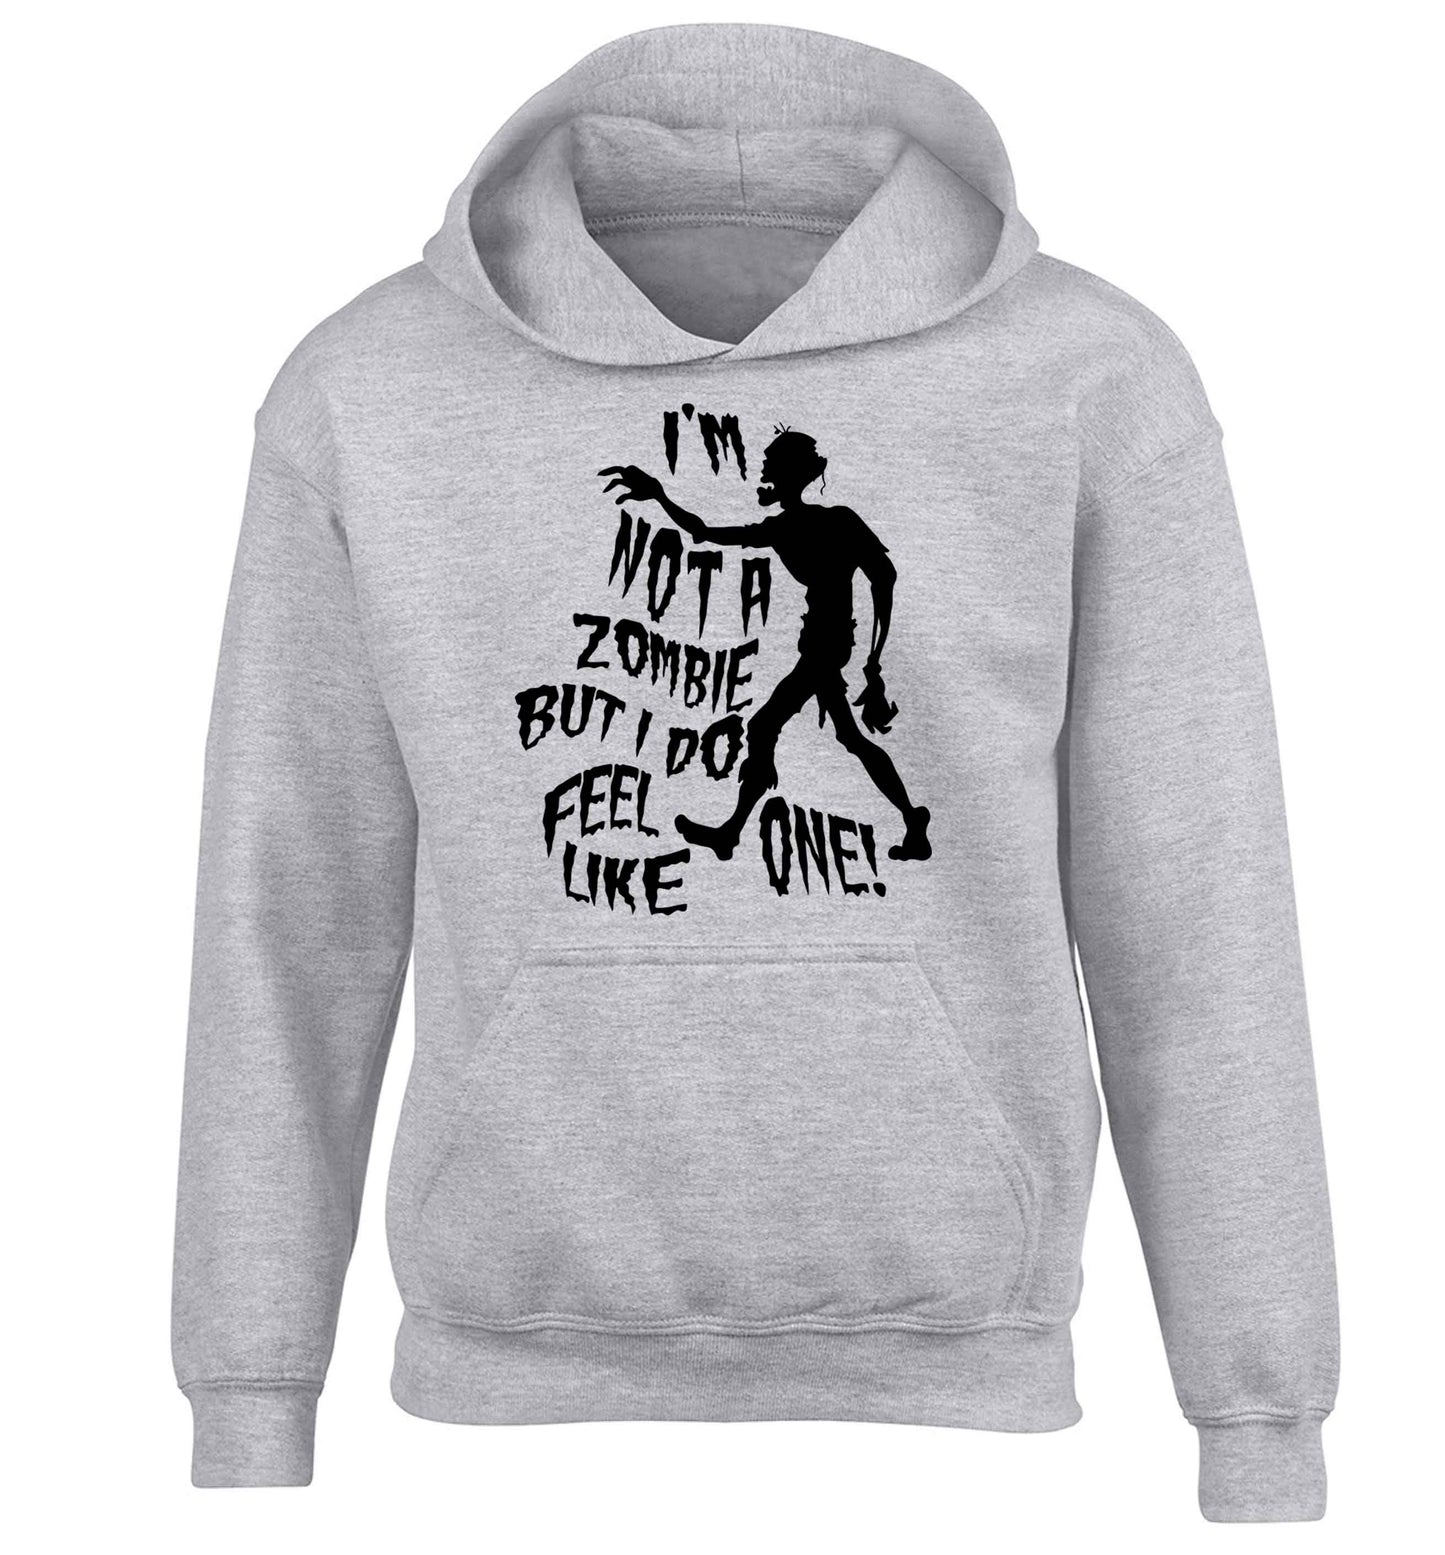 I'm not a zombie but I do feel like one! children's grey hoodie 12-13 Years